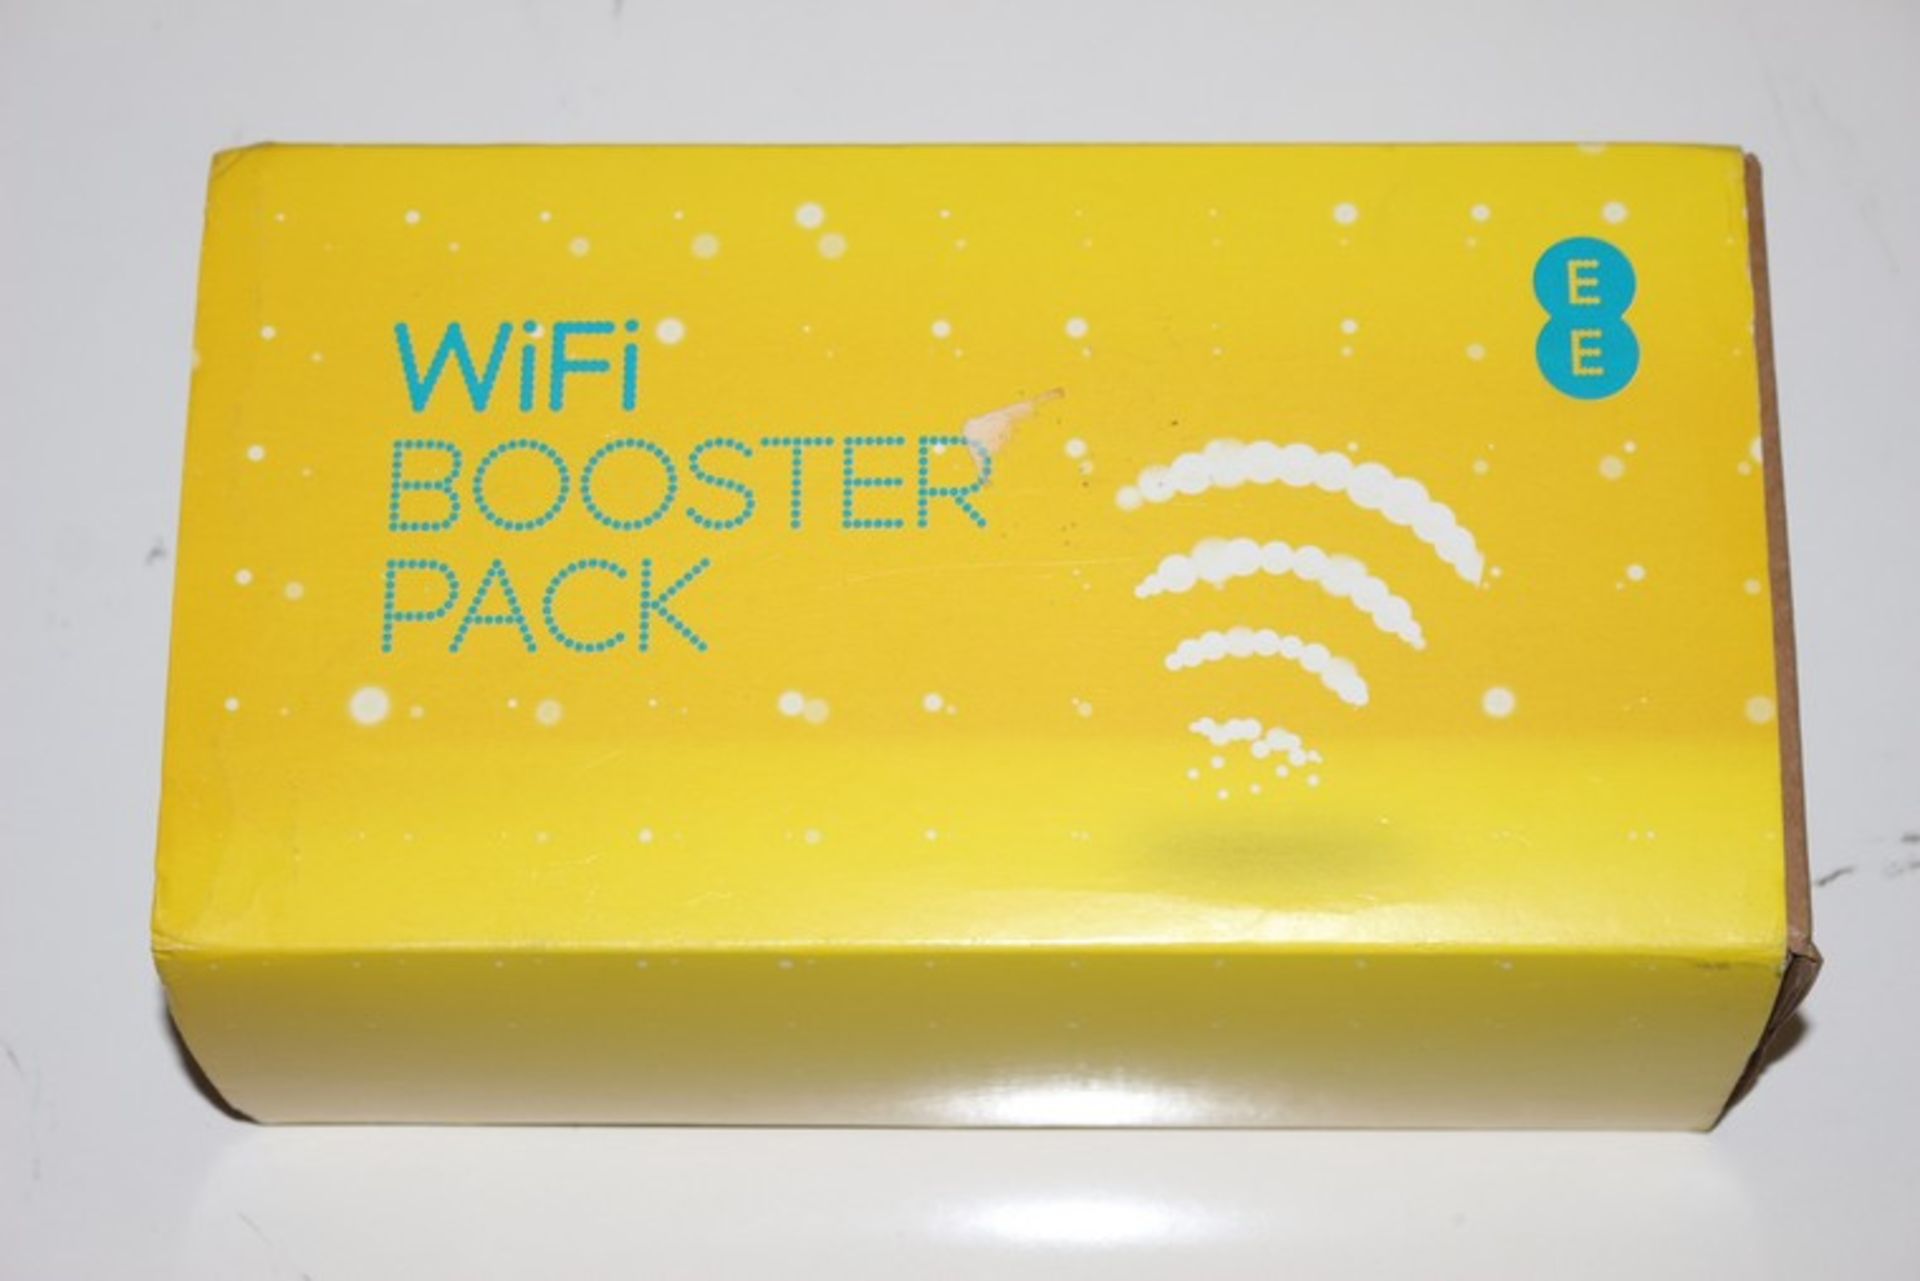 1 x BOXED WIFI BOOSTER PACK RRP £100 *PLEASE NOTE THAT THE BID PRICE IS MULTIPLIED BY THE NUMBER